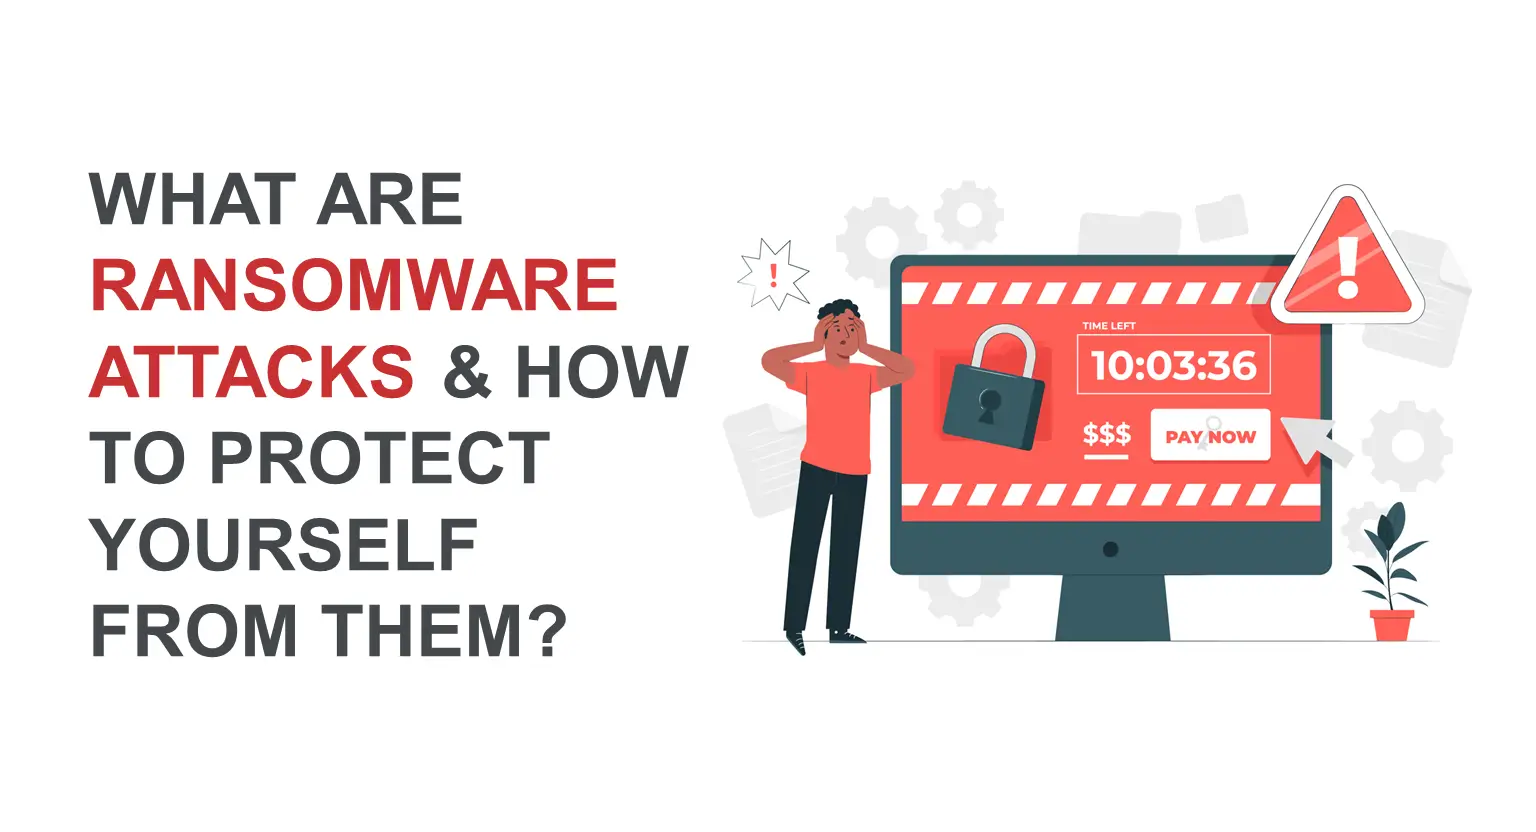 What Are Ransomware Attacks & How To Protect Yourself From Them?